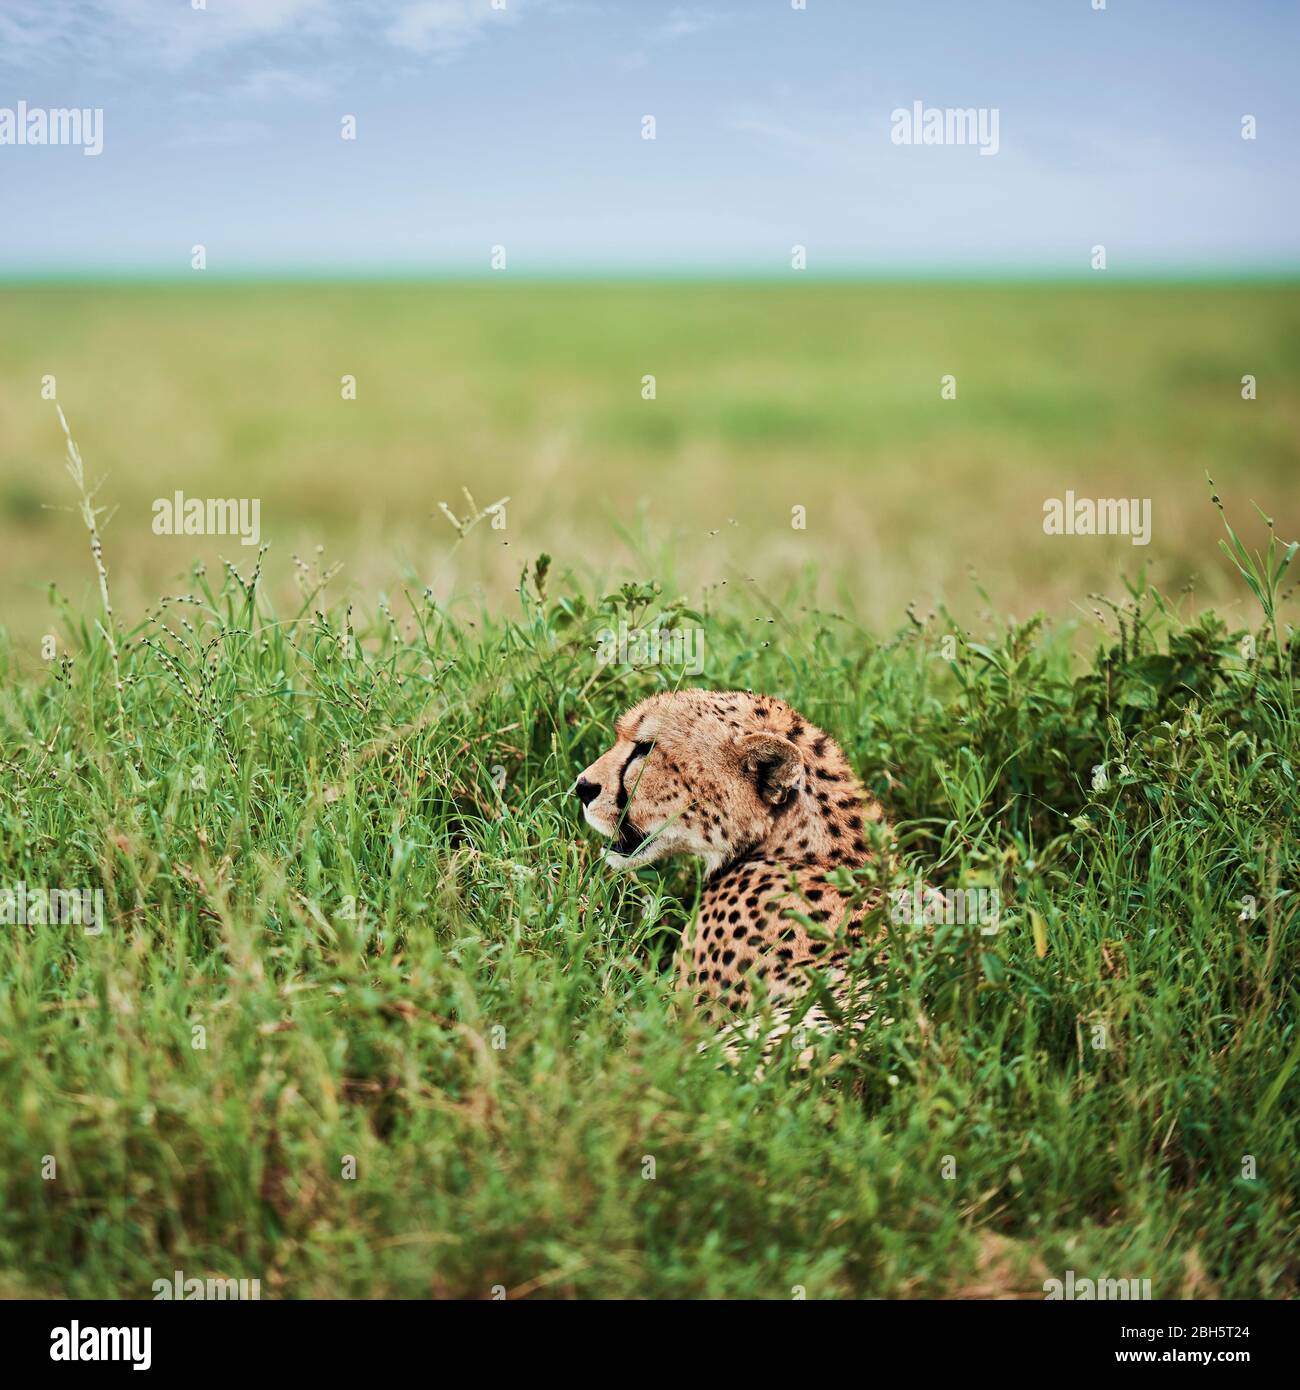 African cheetah in the grass Stock Photo